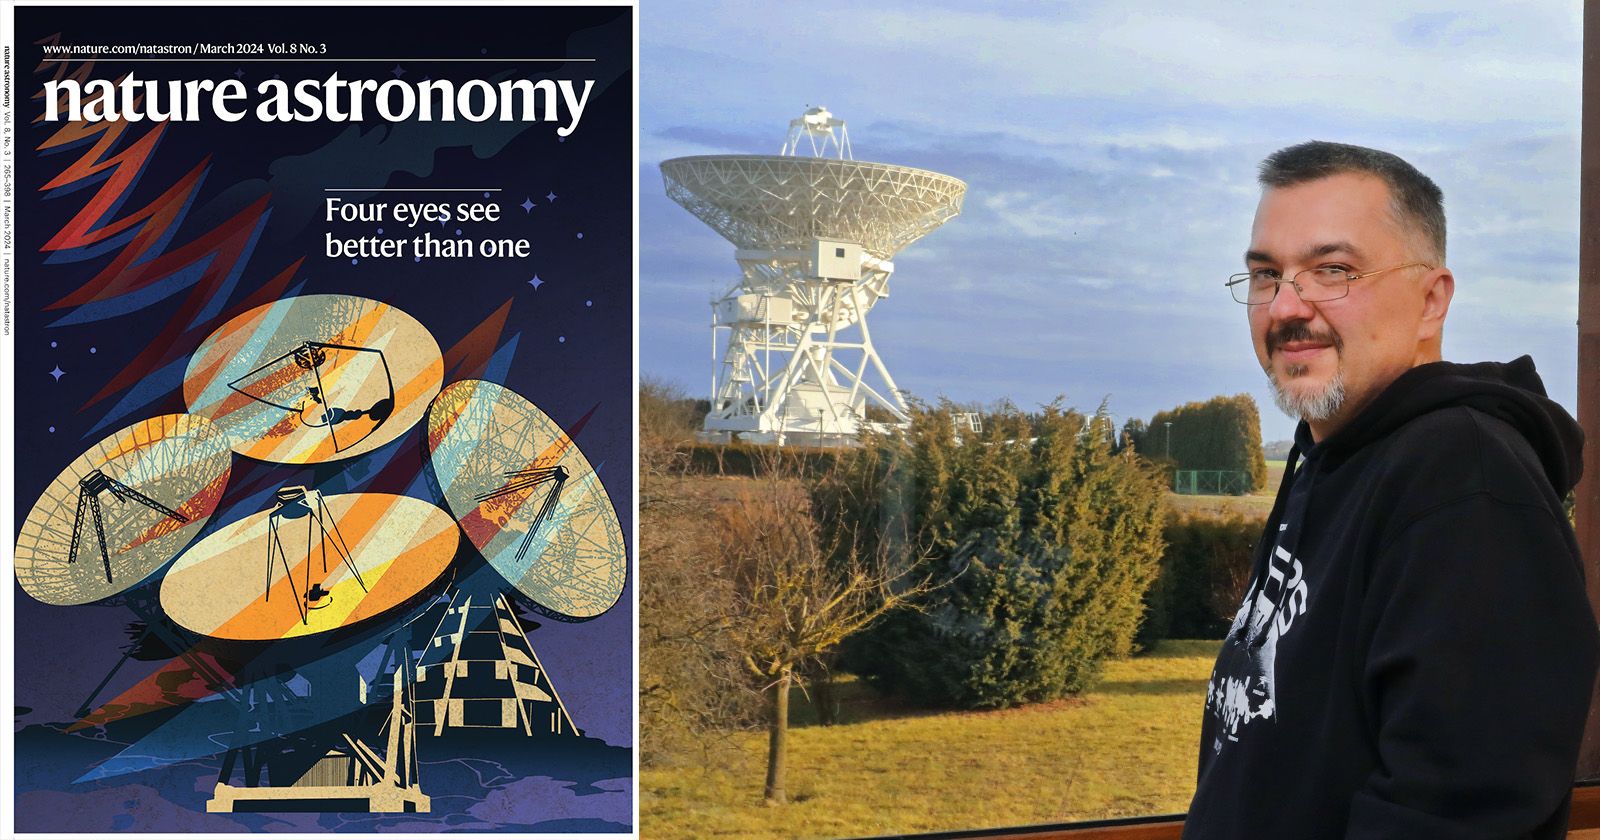 Collage: on the left a graphic with four radiotelescopes, on the right a man stands by the window, in the background there is a radiotelescope